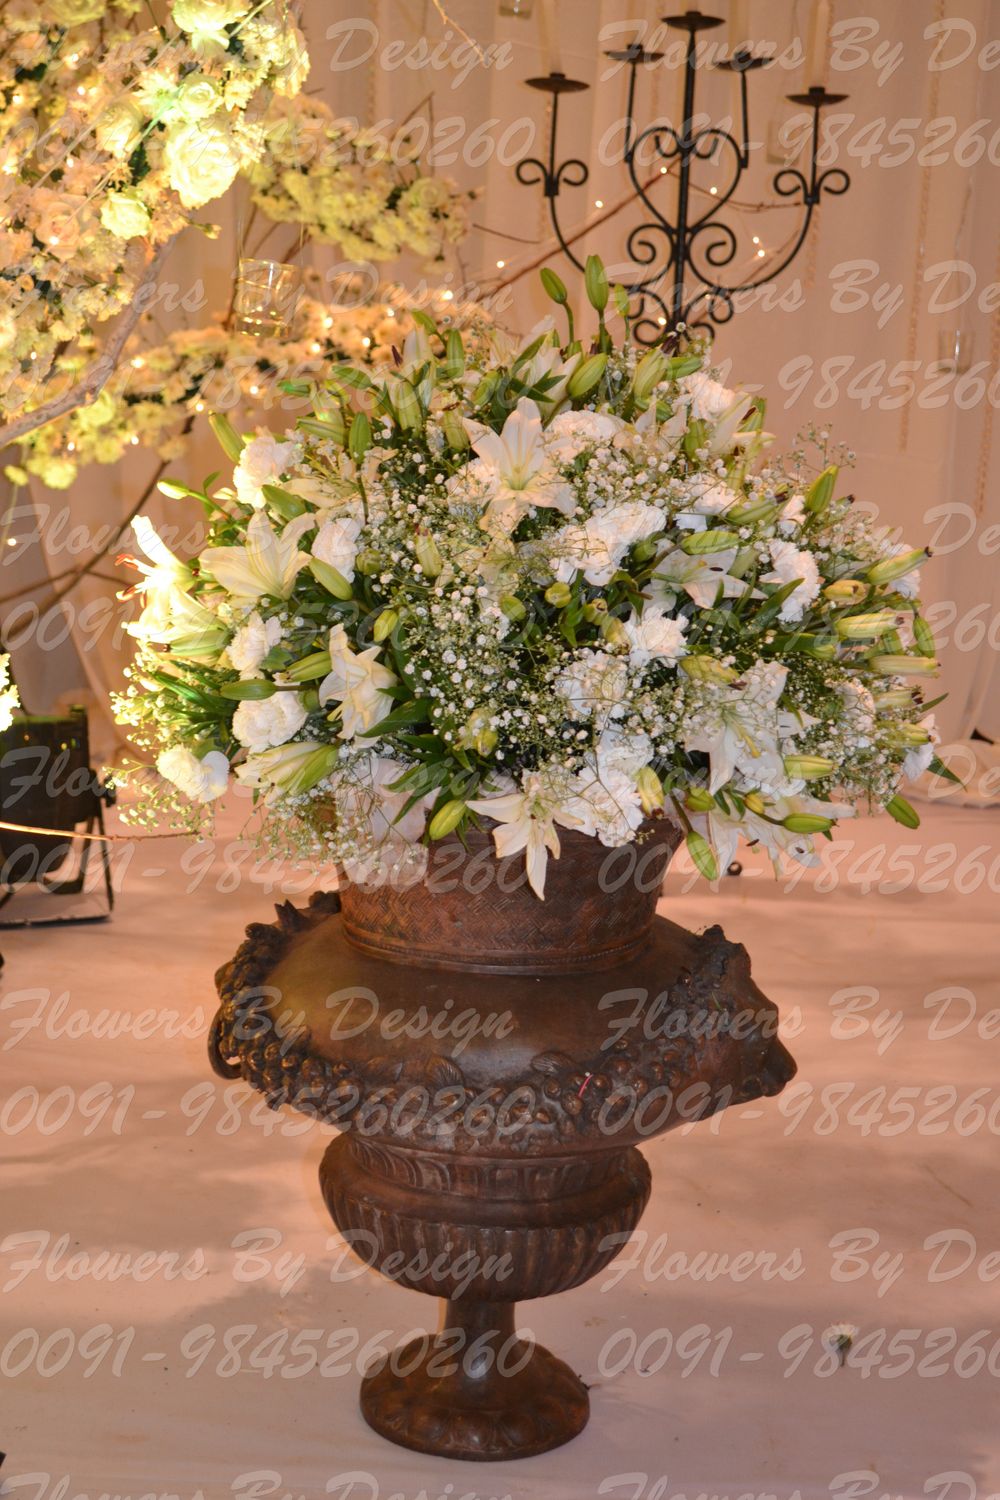 Photo By Flowers By Design - Decorators